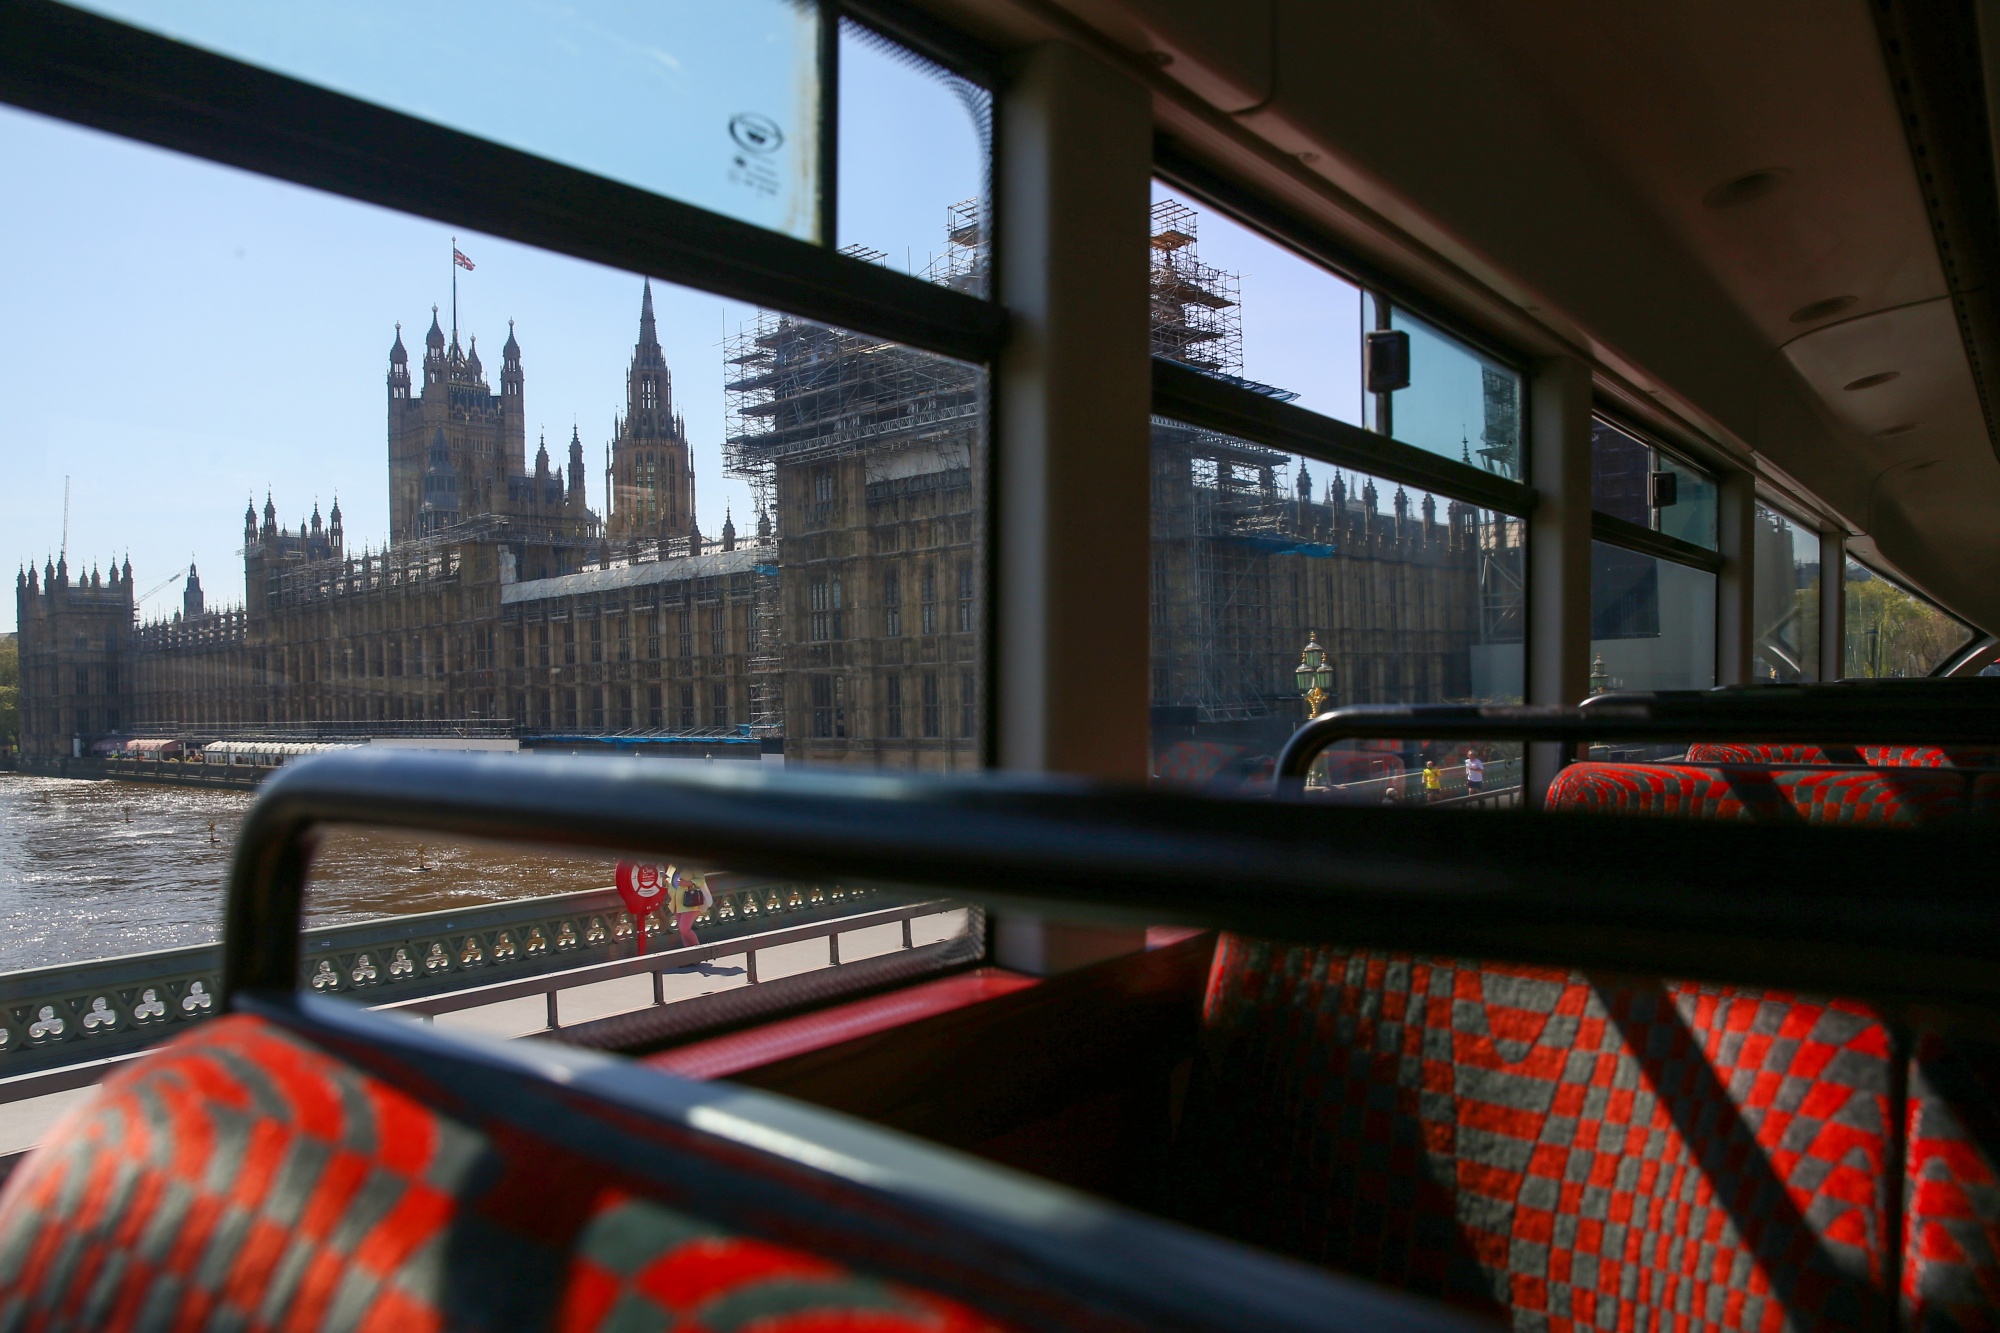 The Houses of Parliament stand in this view from inside a bus in London on April 22.